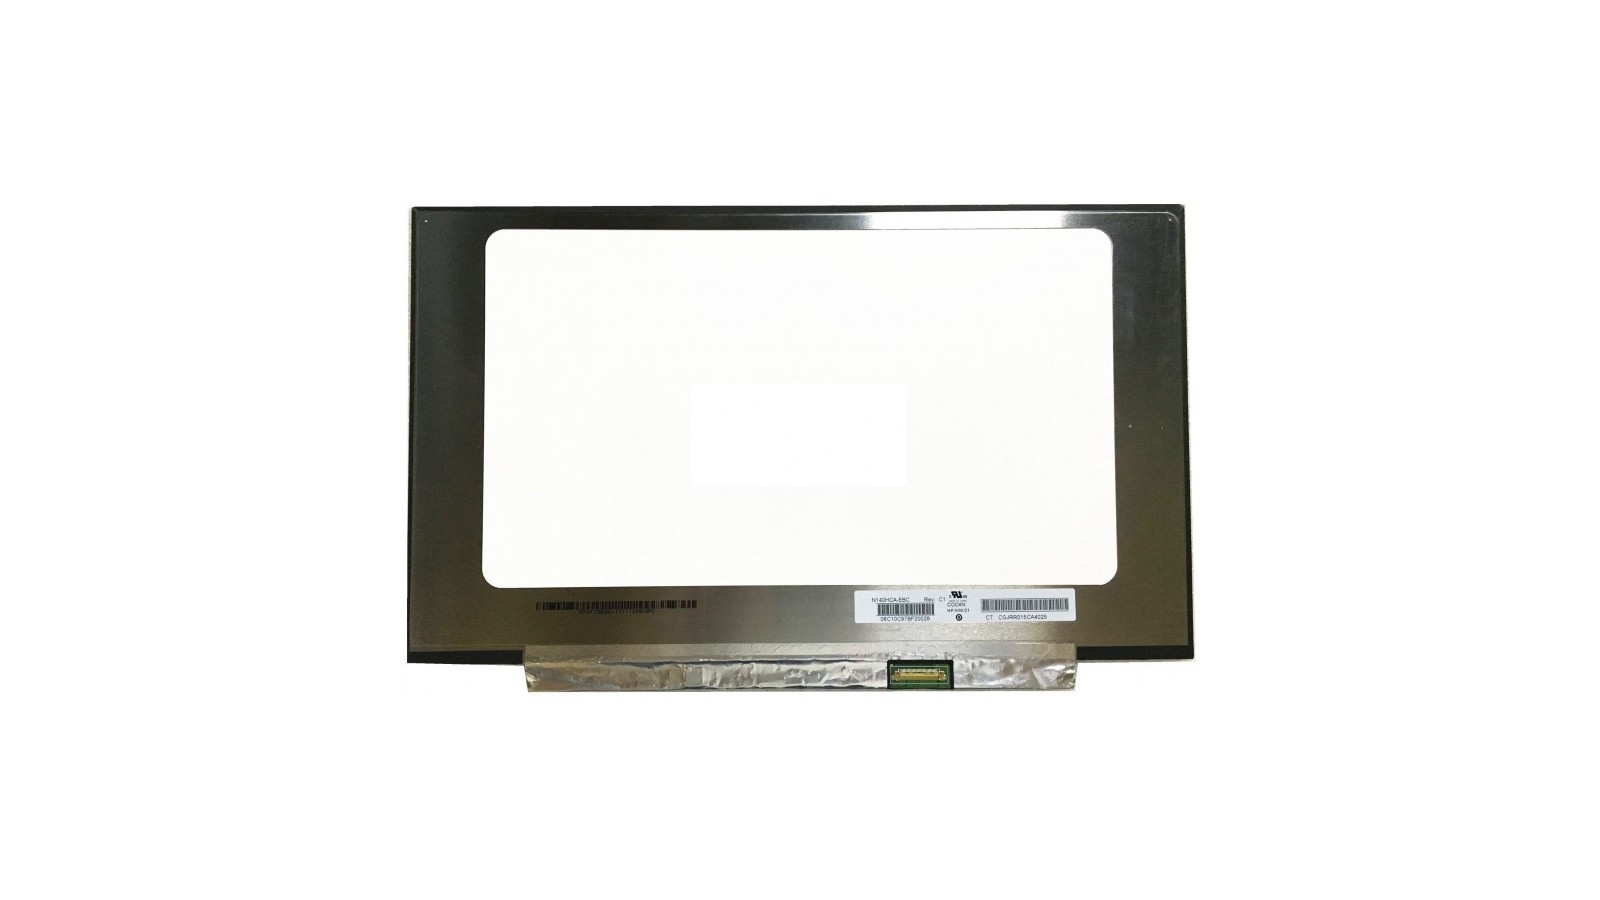 Display LCD Schermo 14.0 LED compatibile con NT140FHM-N43 Full Hd